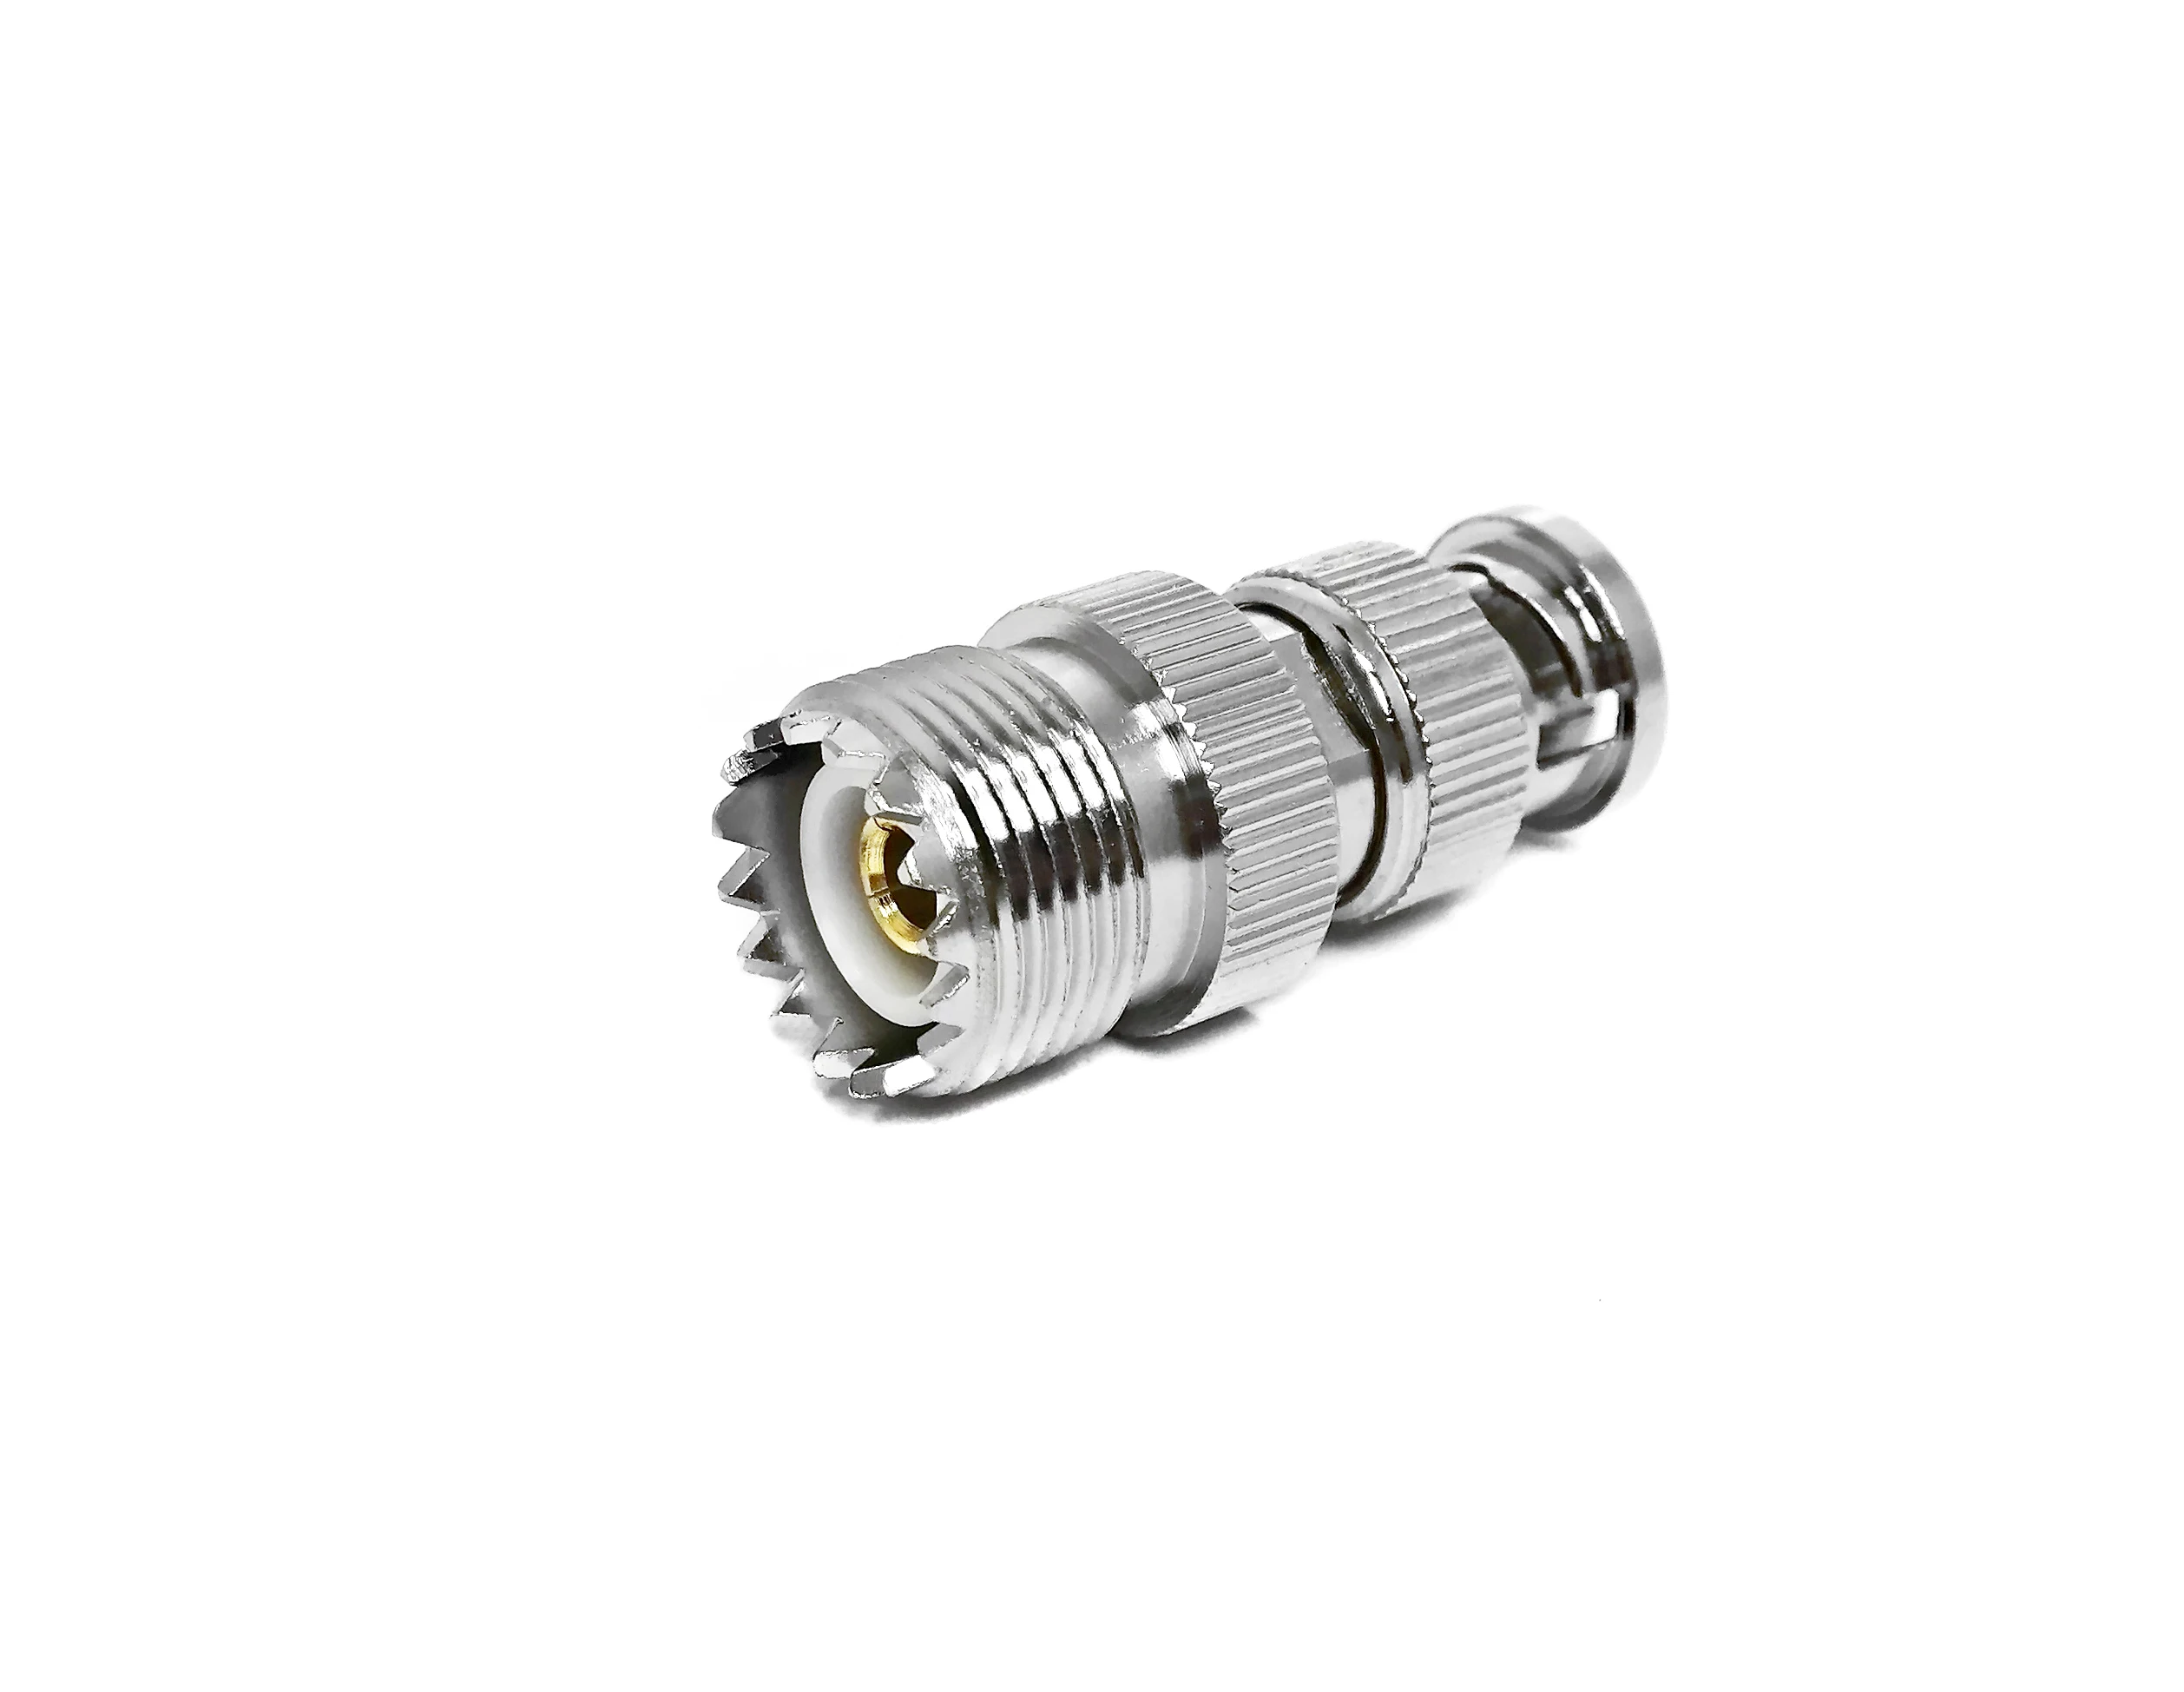 BNC to UHF Adapter BNC Male to SO239 UHF Female Jack RF Coax Coaxial Connector Convertor for Antennas manufacture